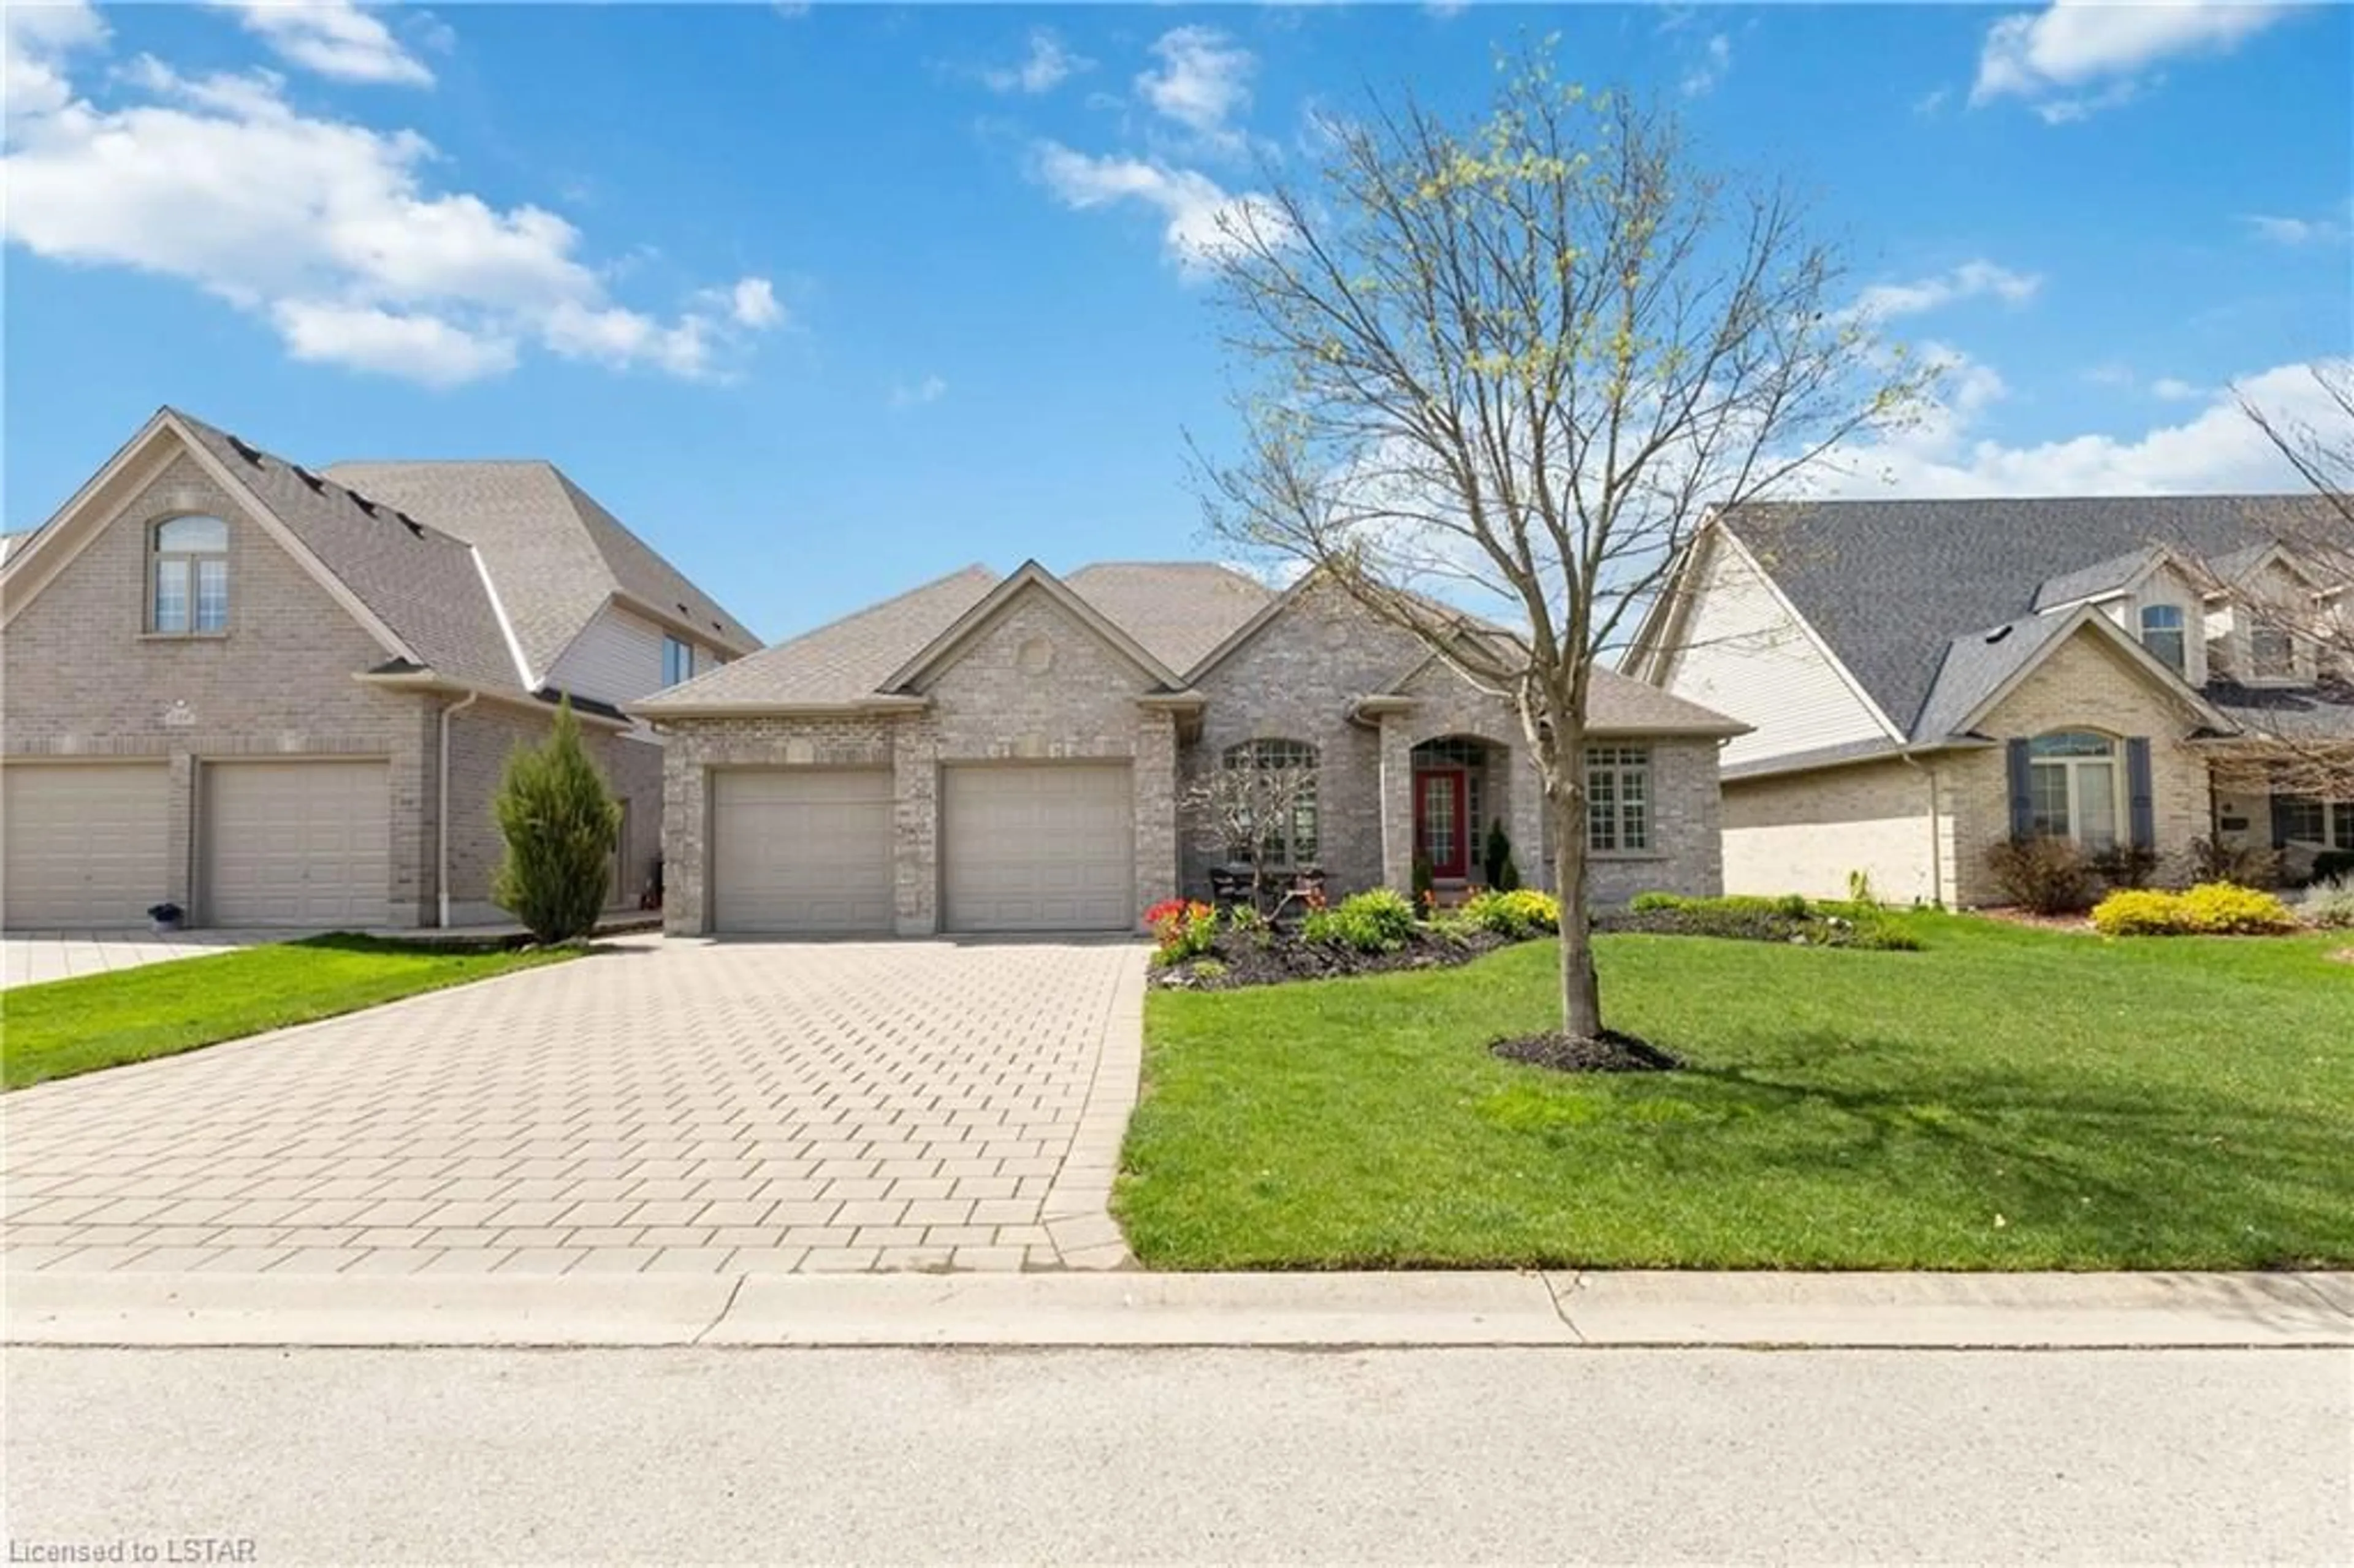 Frontside or backside of a home for 242 East Rivertrace Walk, London Ontario N6G 5L1